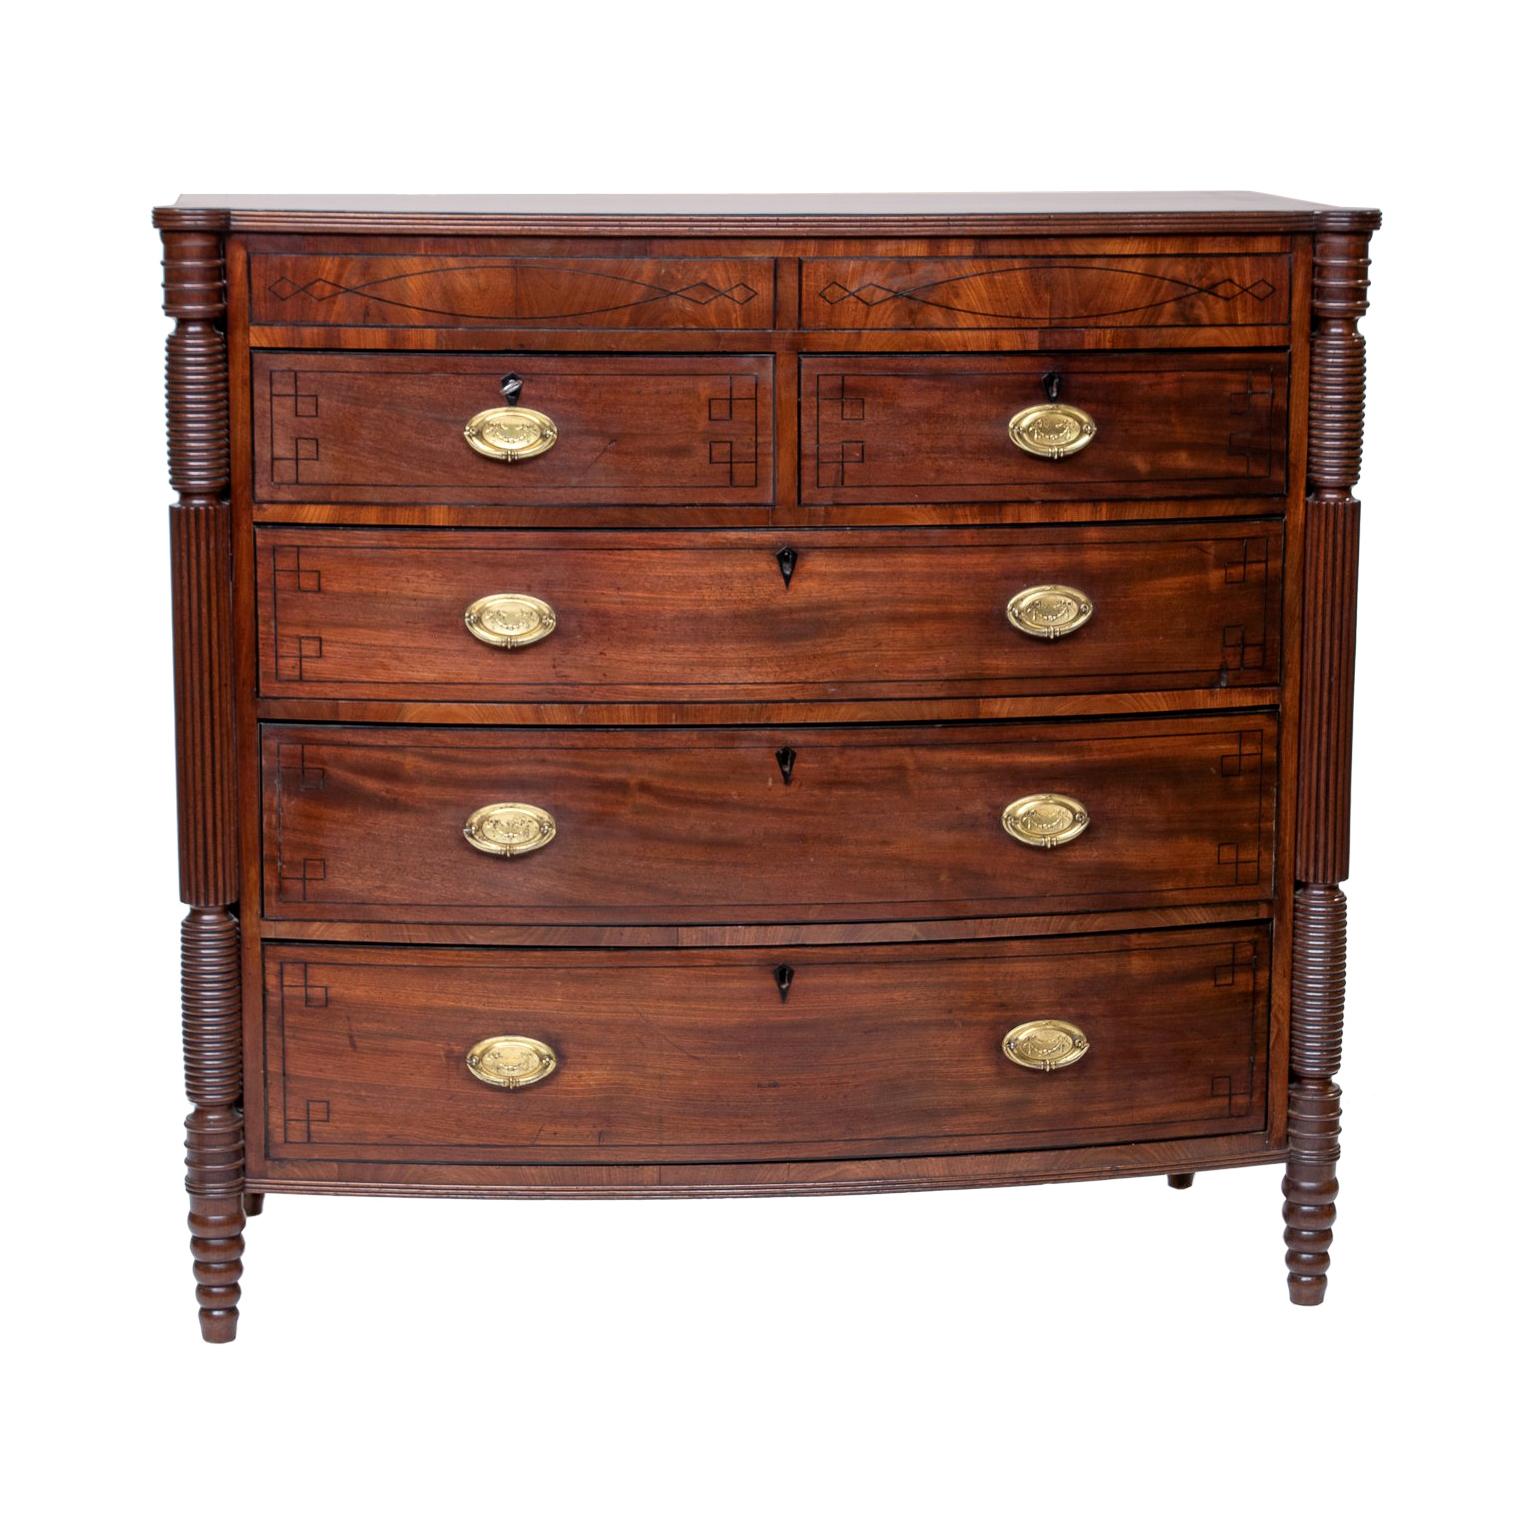 19th Century Regency Chest of Drawers